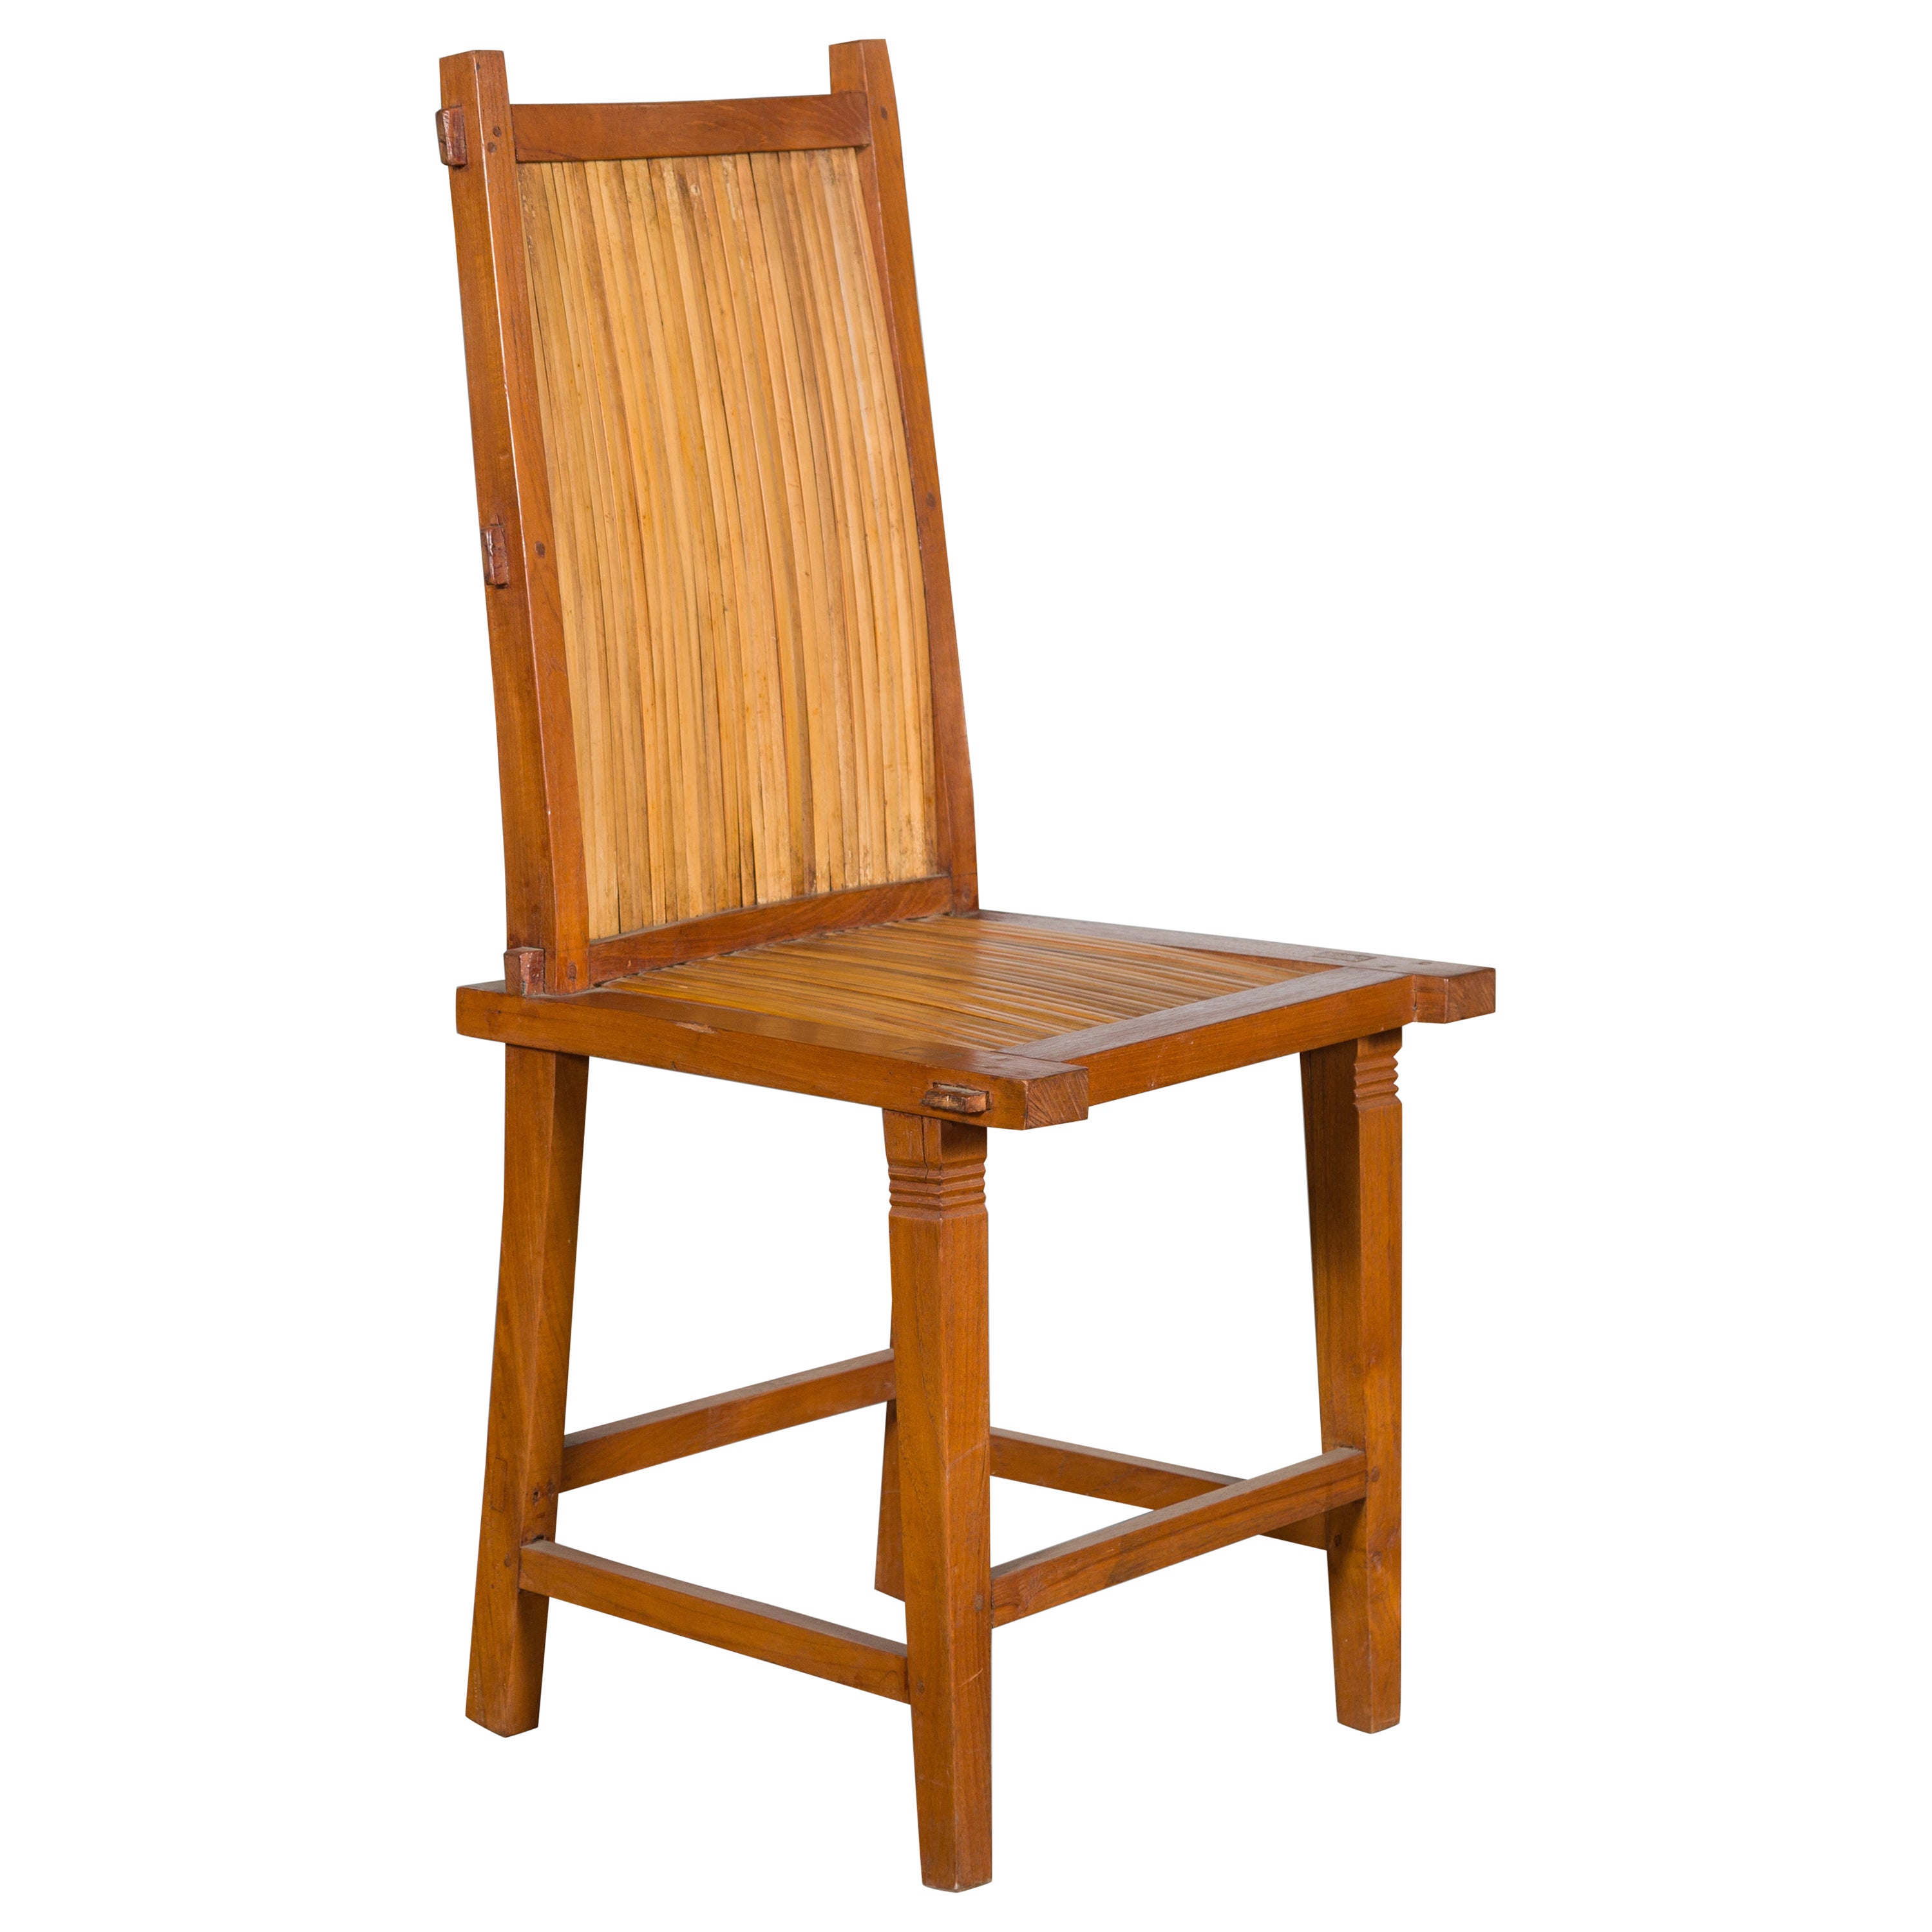 Rustic Javanese Vintage Wooden Side Chair with Slatted Bamboo Back and Seat For Sale